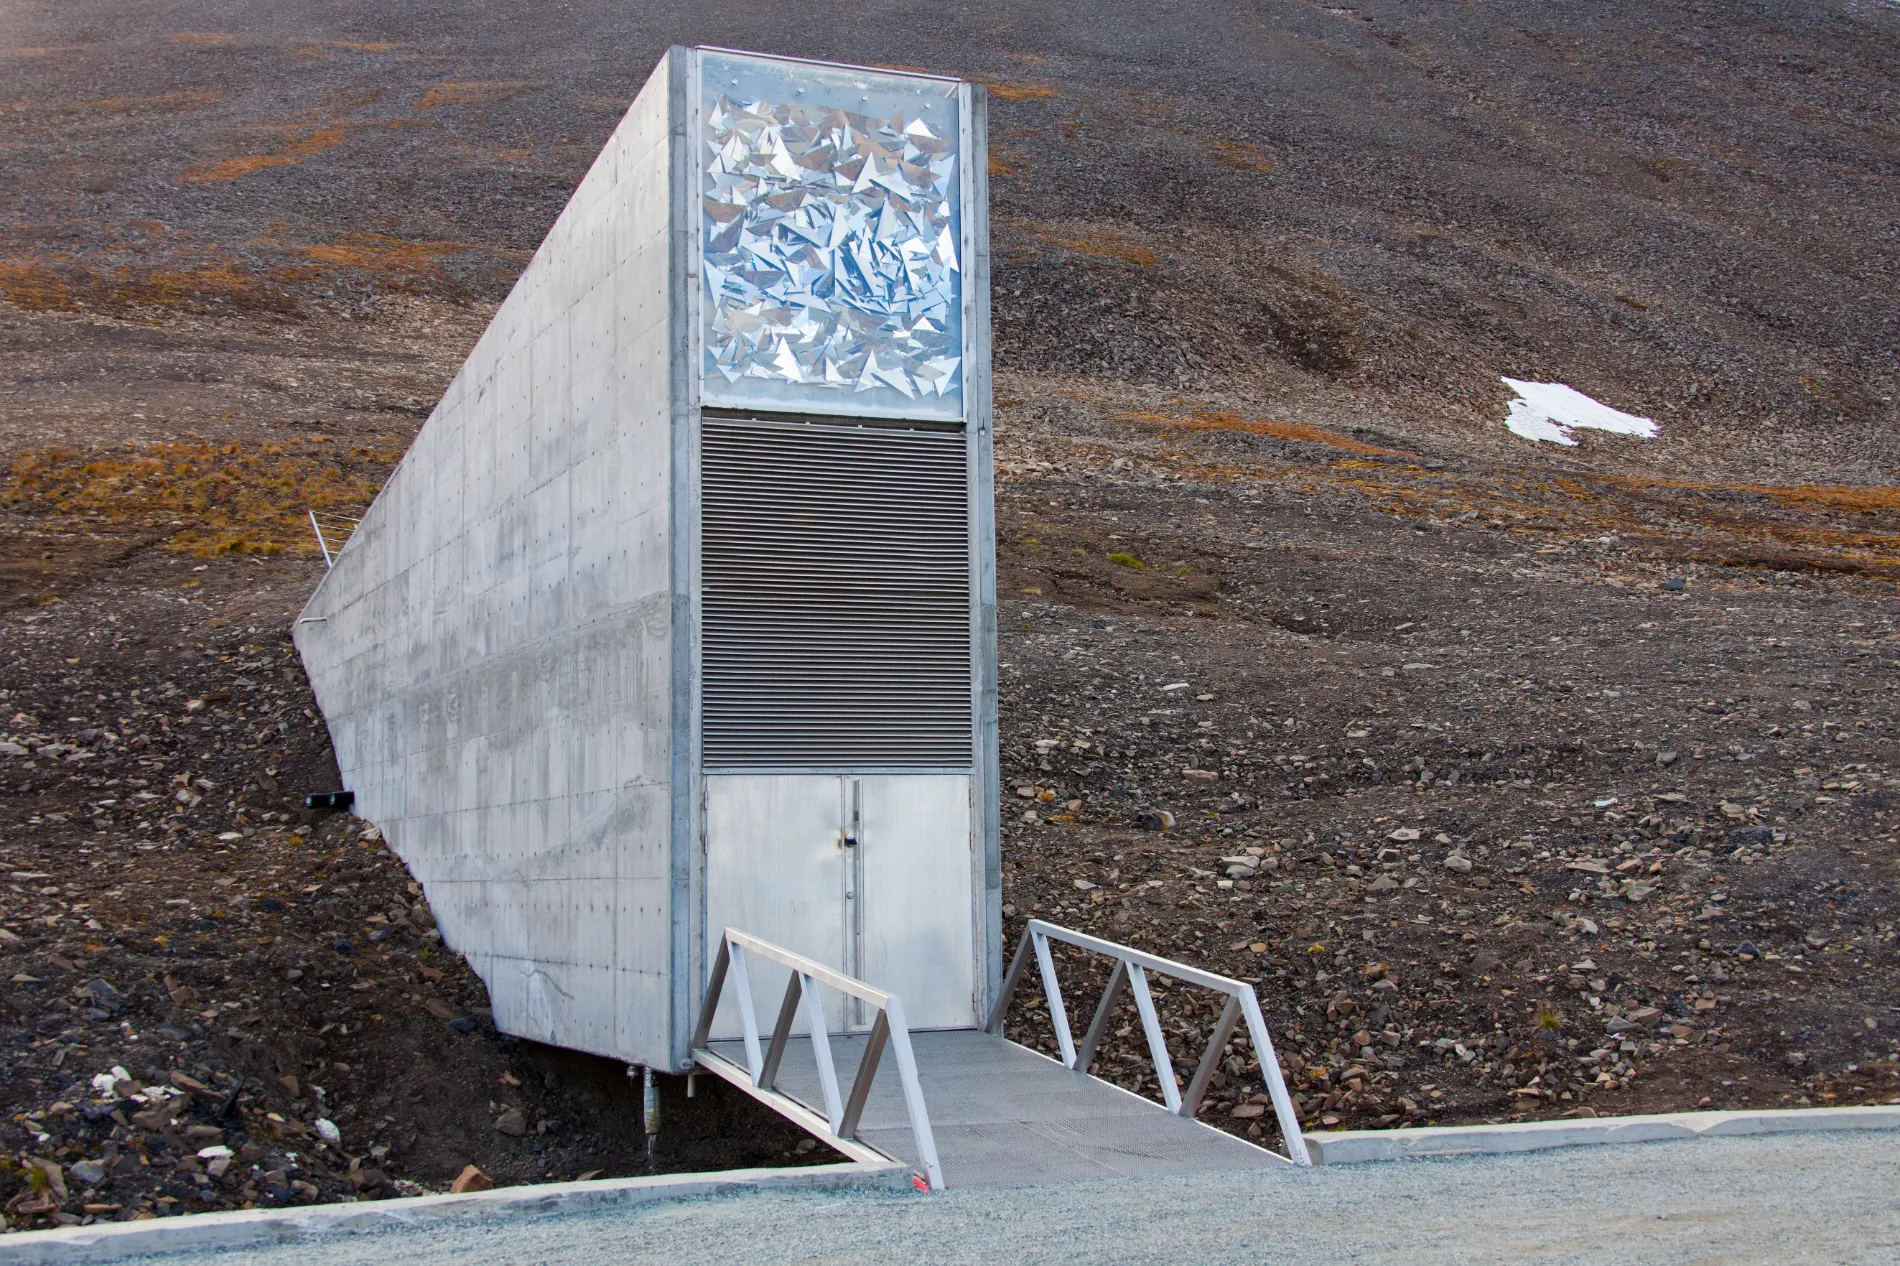 Entrance to the Svalbard Global Seed Vault, largest seed bank in the world near Longyearbyen on the Norwegian island of Spitsbergen.